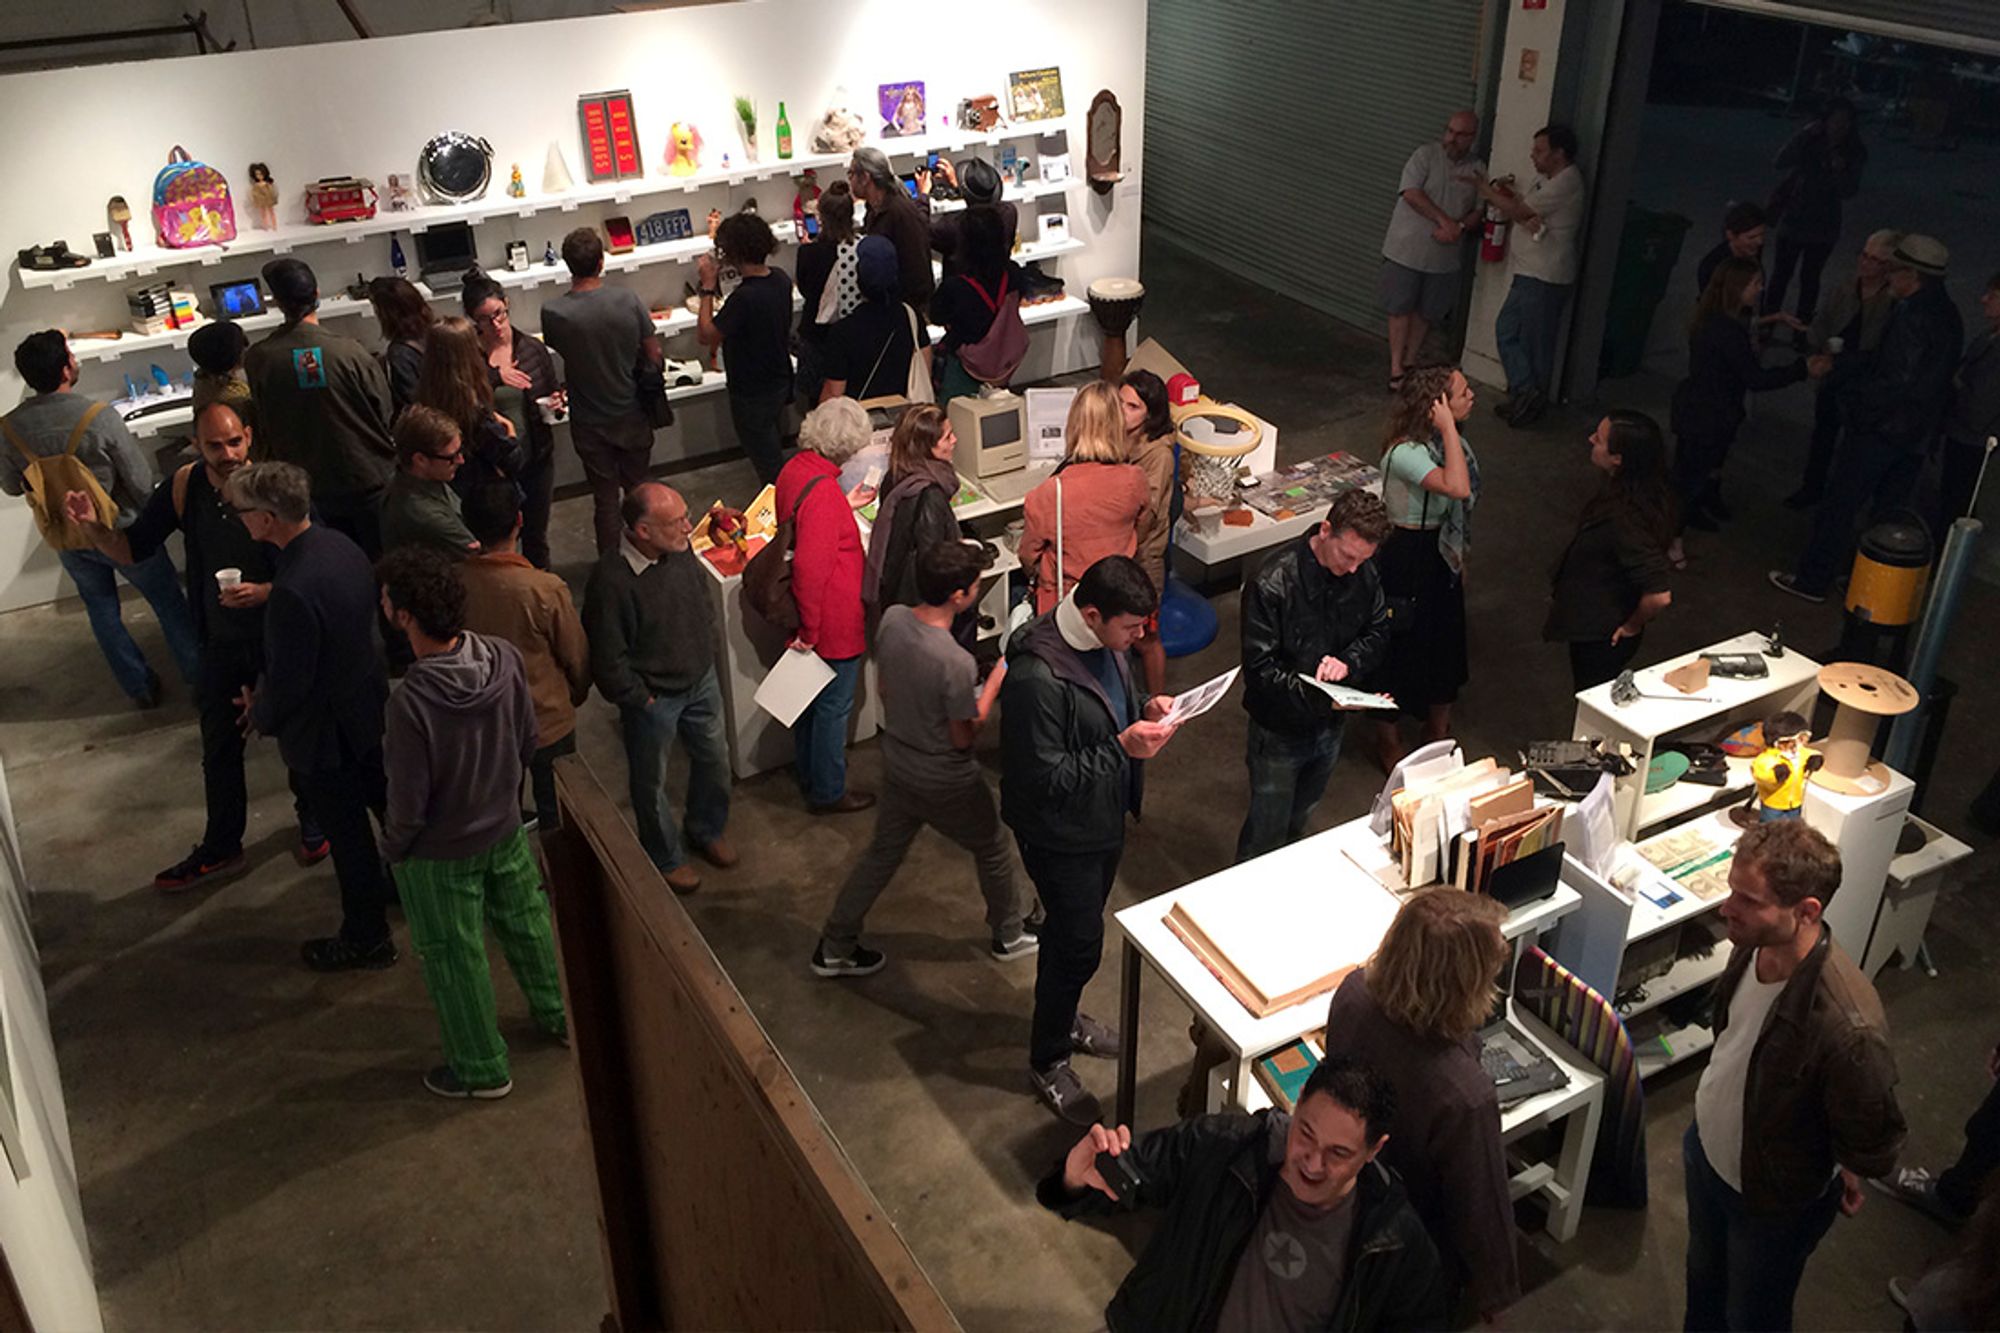 A crowded gallery room with objects and assorted homewares on display.